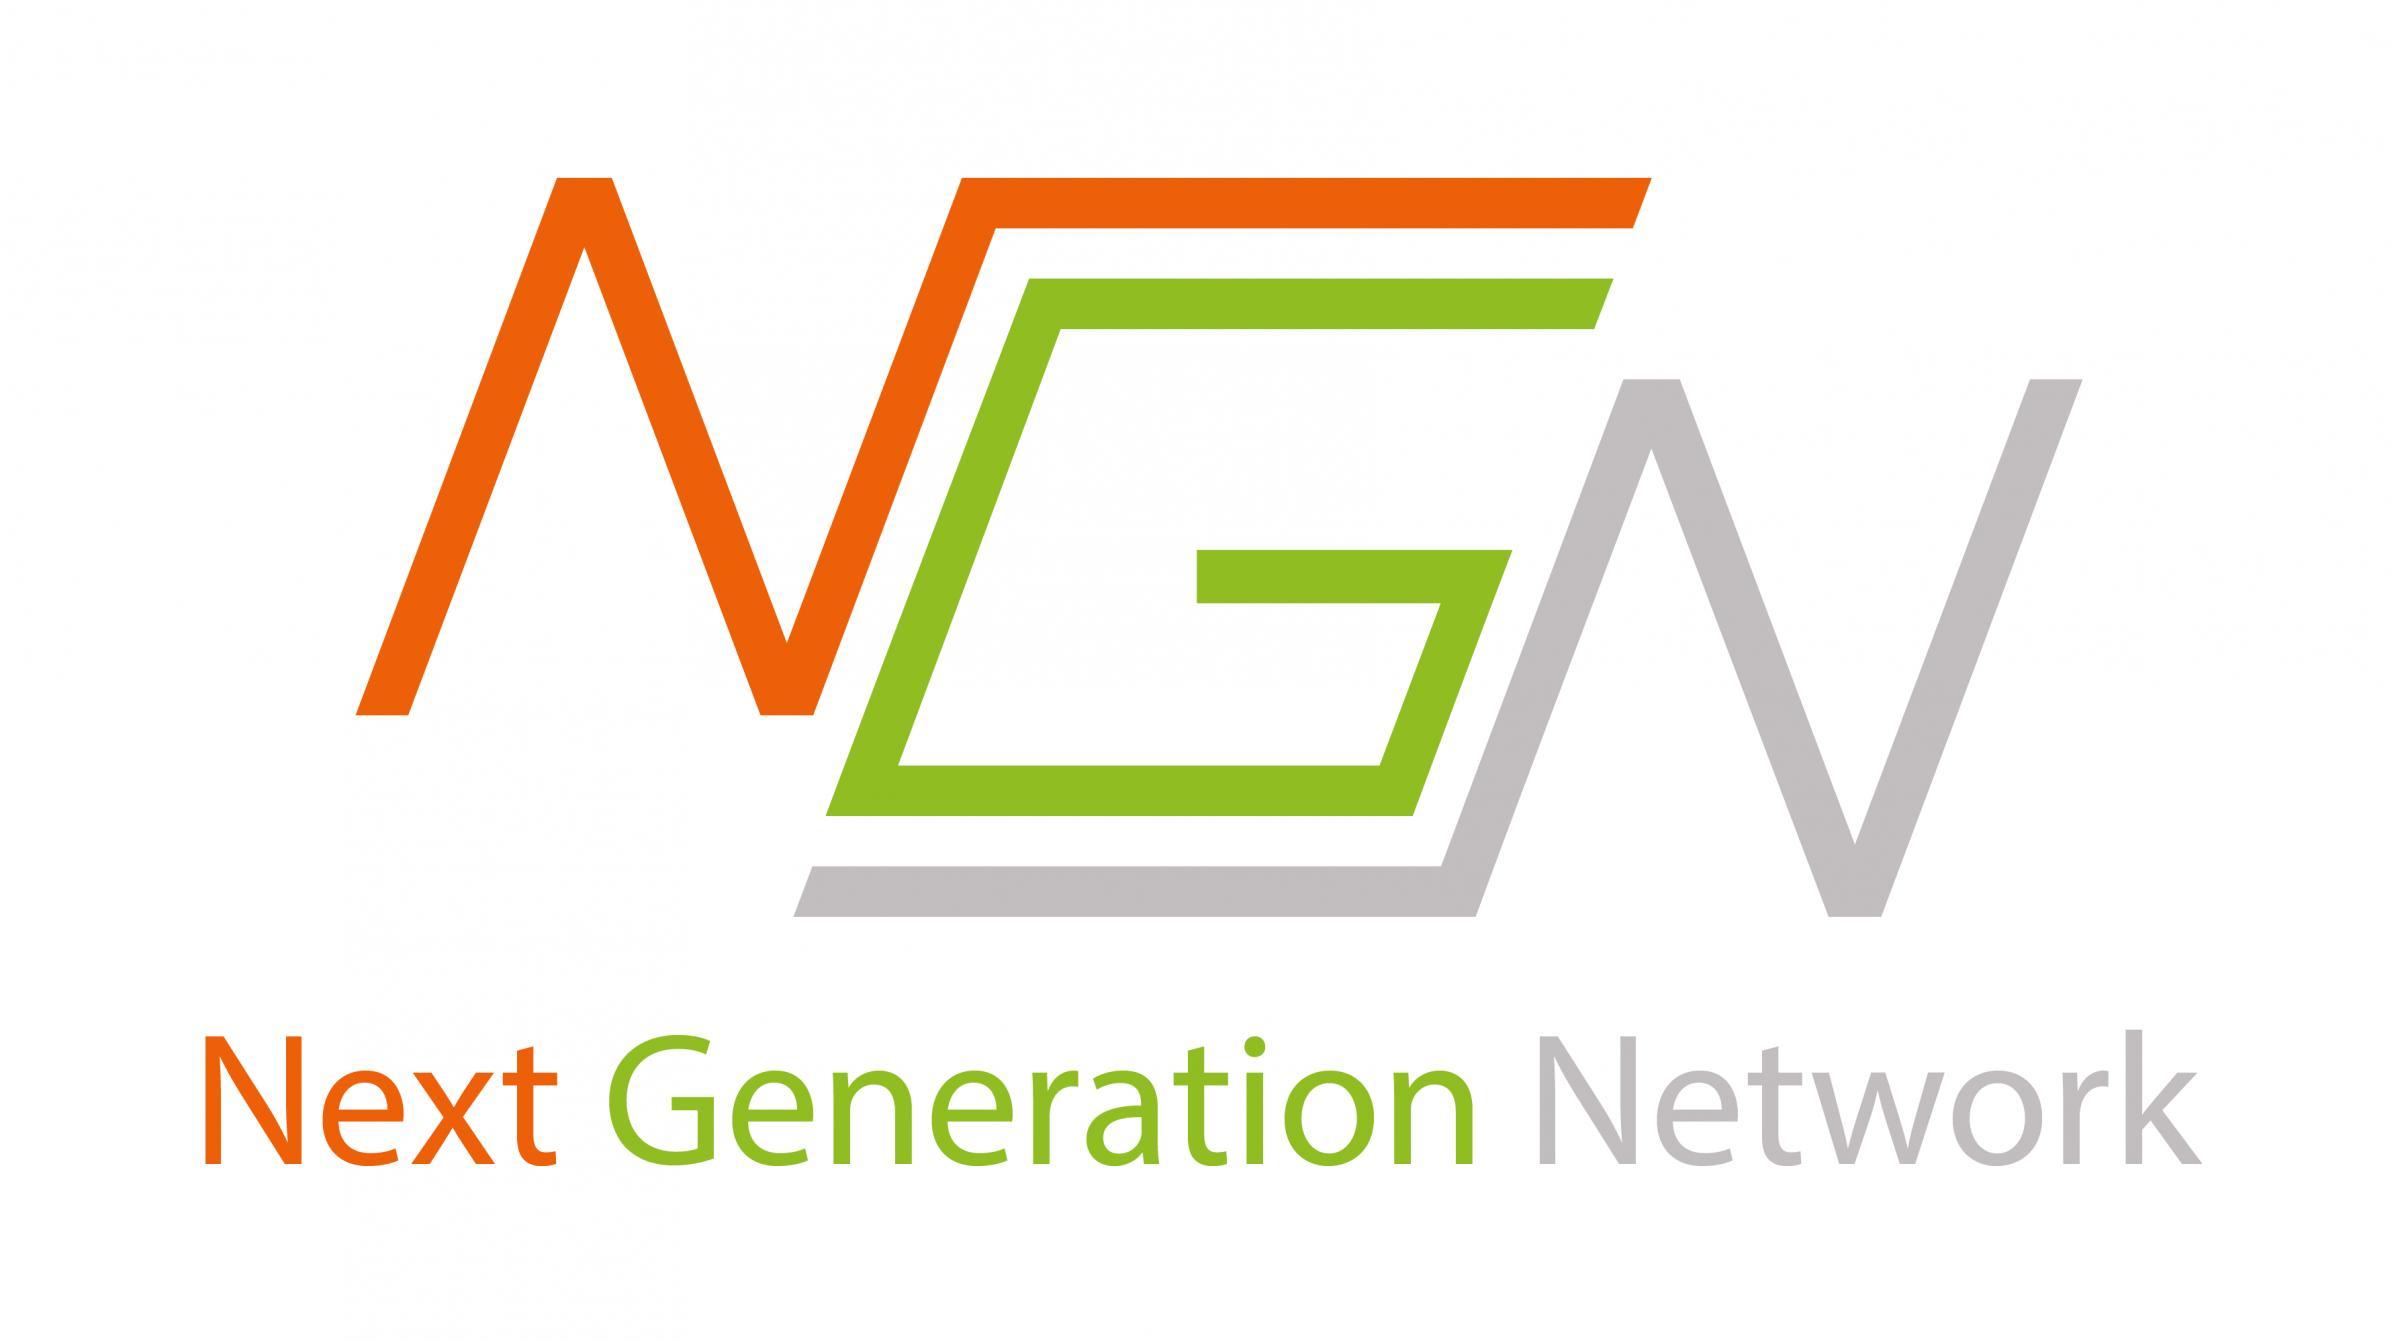 NGN Logo, created by Danny Thompson.